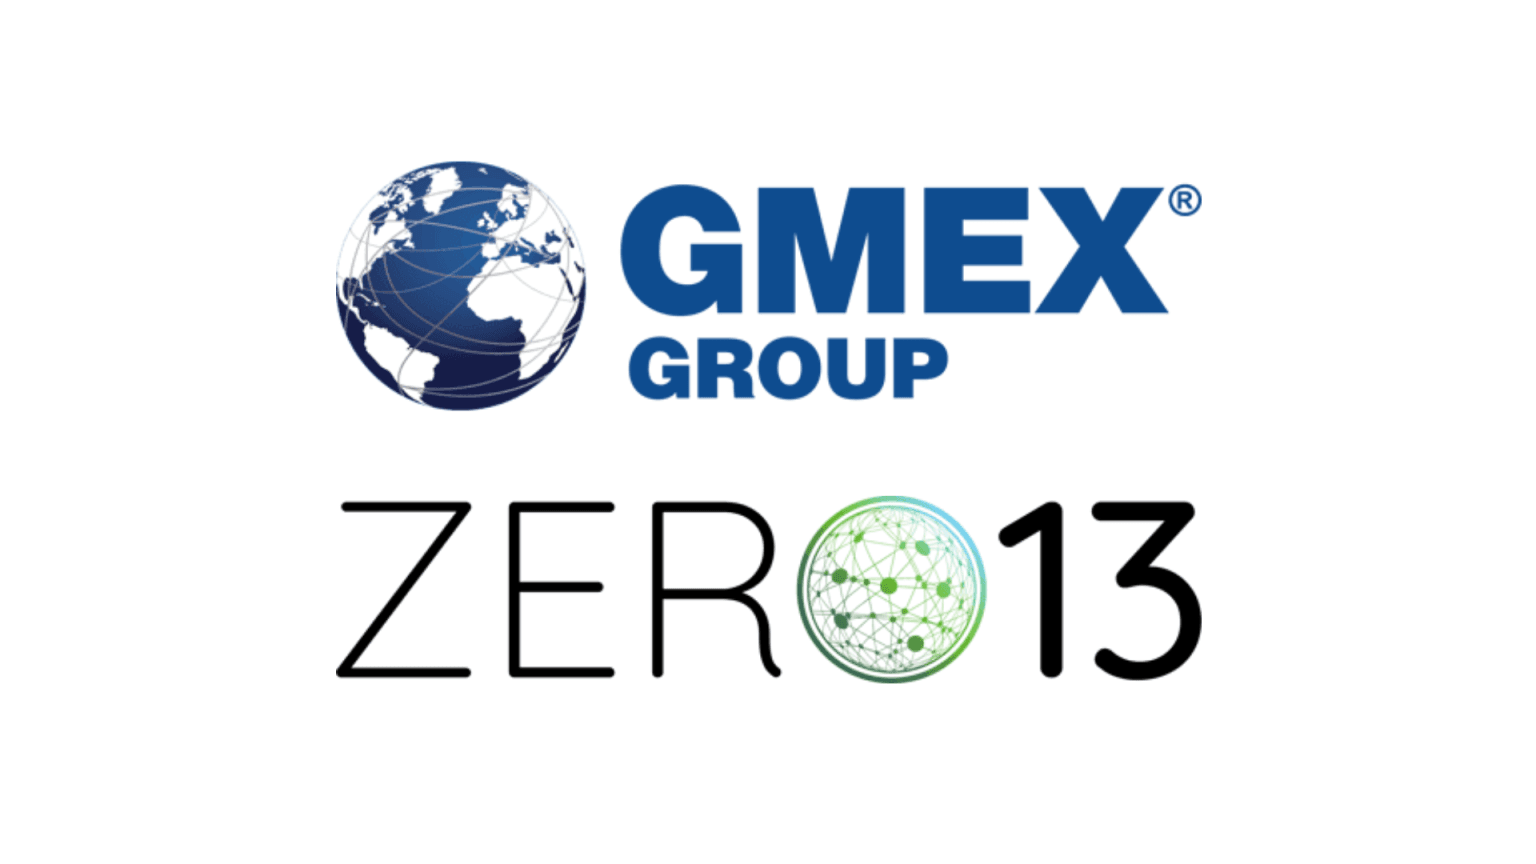 GMEX ZERO13 Collaborates With HalaZone Technologies And CarbonCX: A Comprehensive Set Of Solutions For Digital Carbon Credit